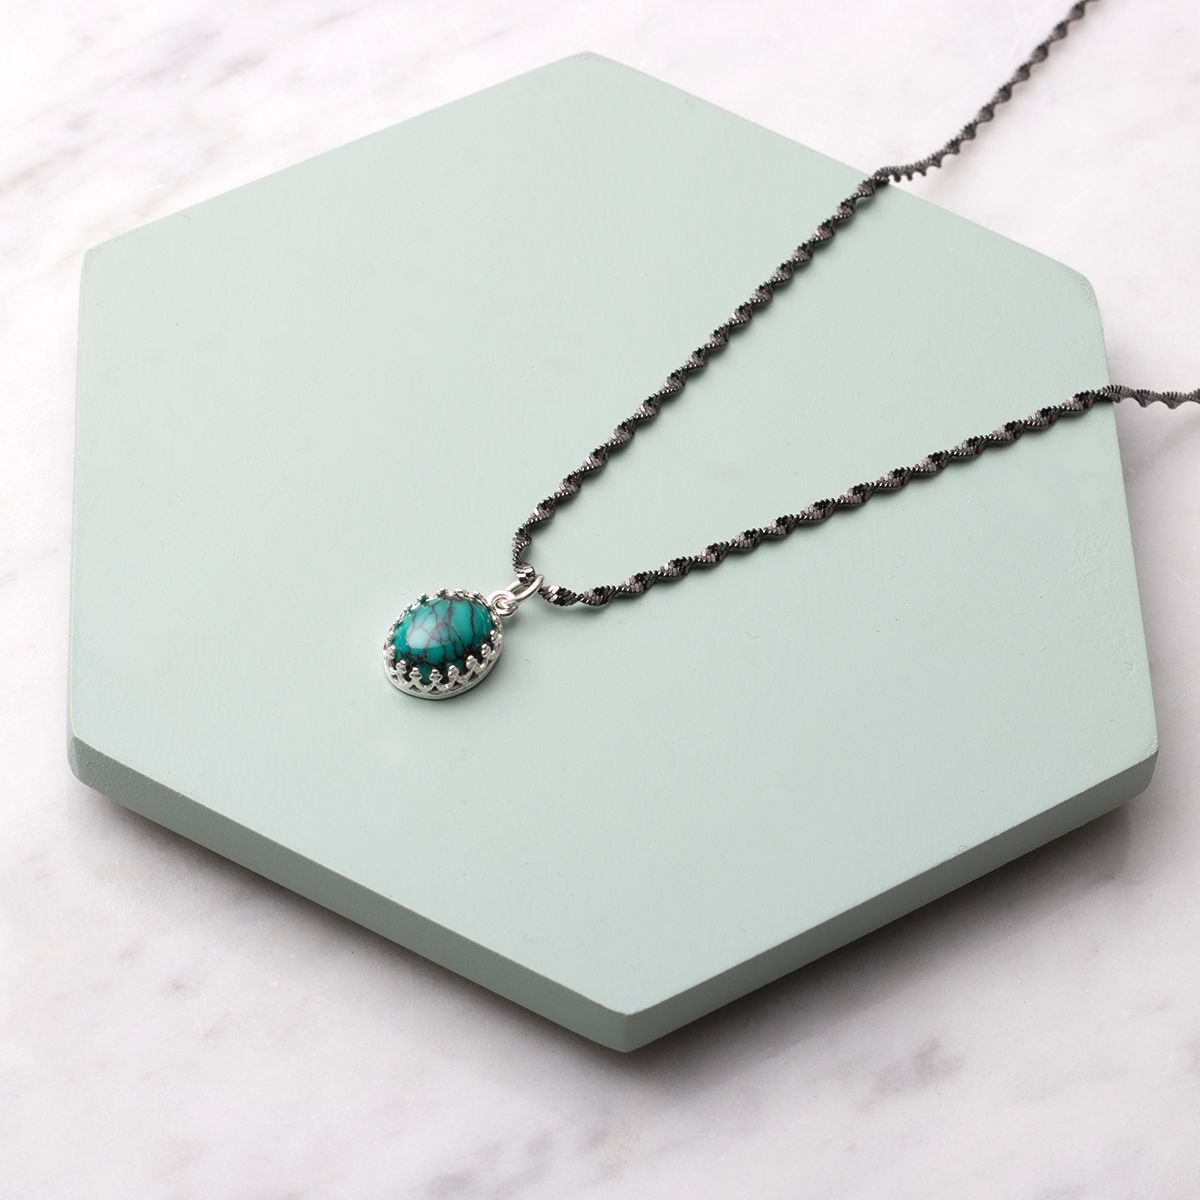 Chinese Spiderweb Turquoise Necklace